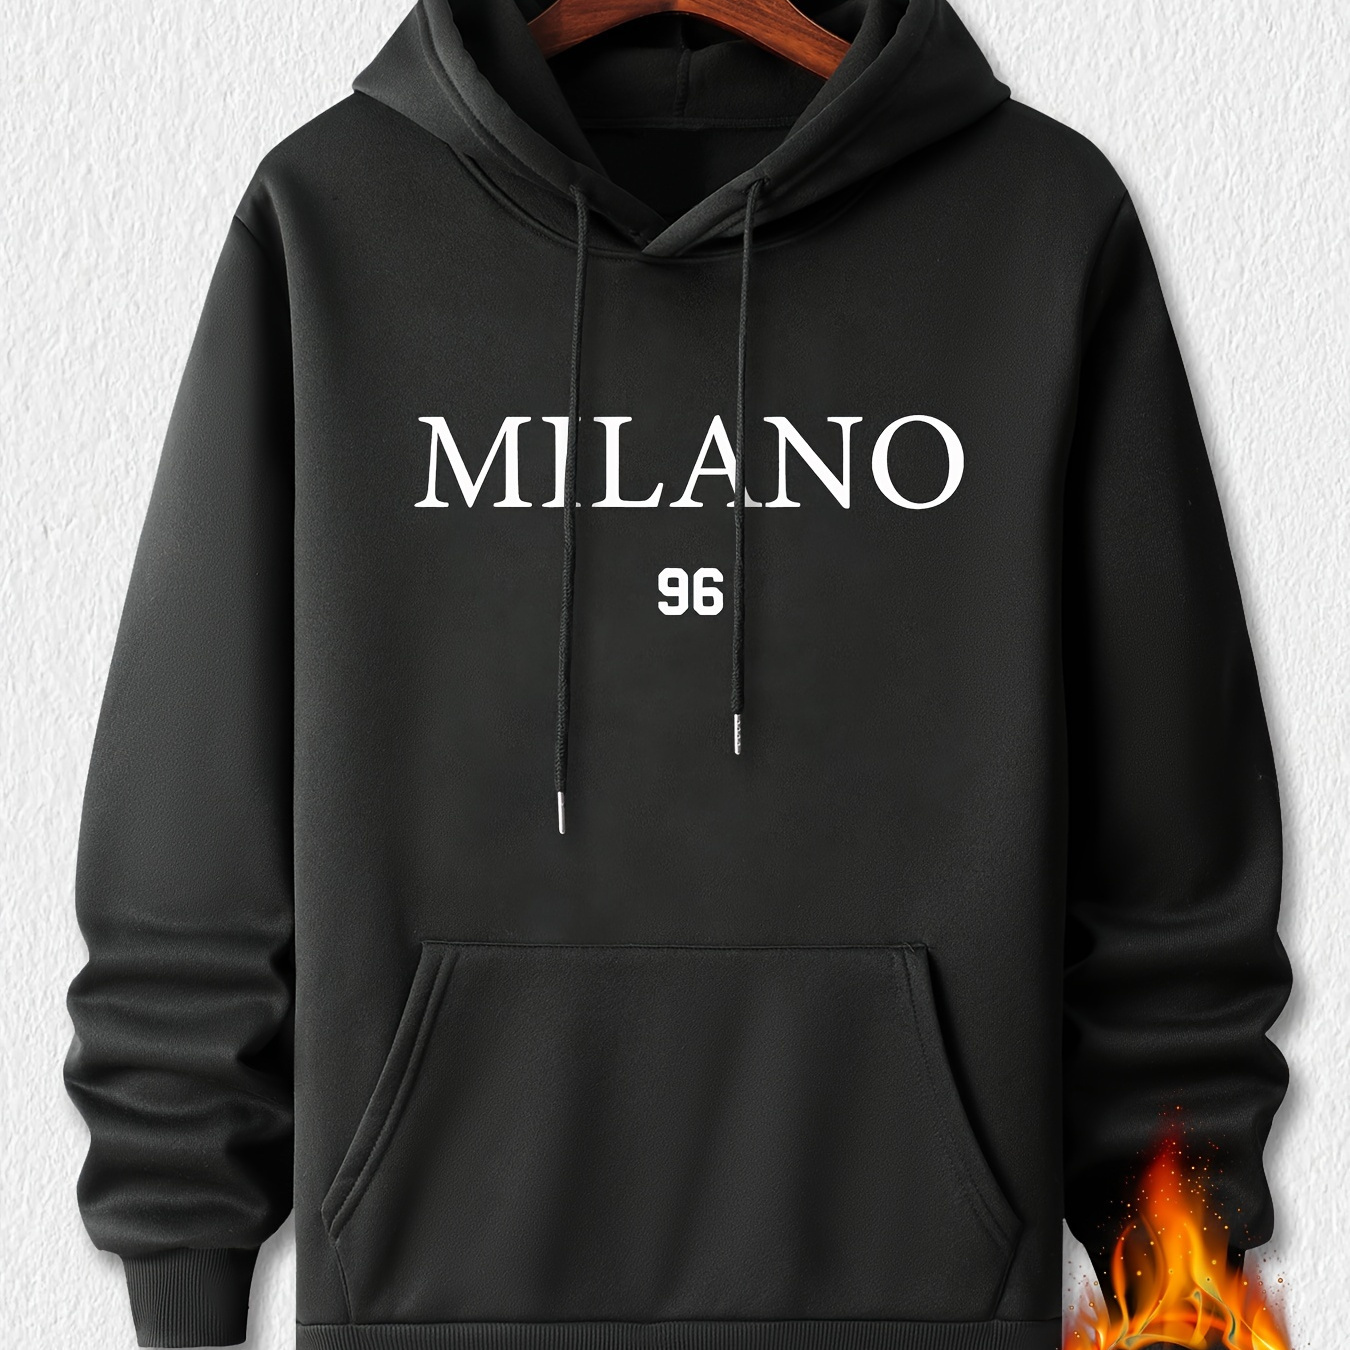 

Milano Print Men's Warm Pullover Round Neck Hooded Sweatshirt Print Hoodie Casual Top For Autumn Winter Men's Clothing As Gifts